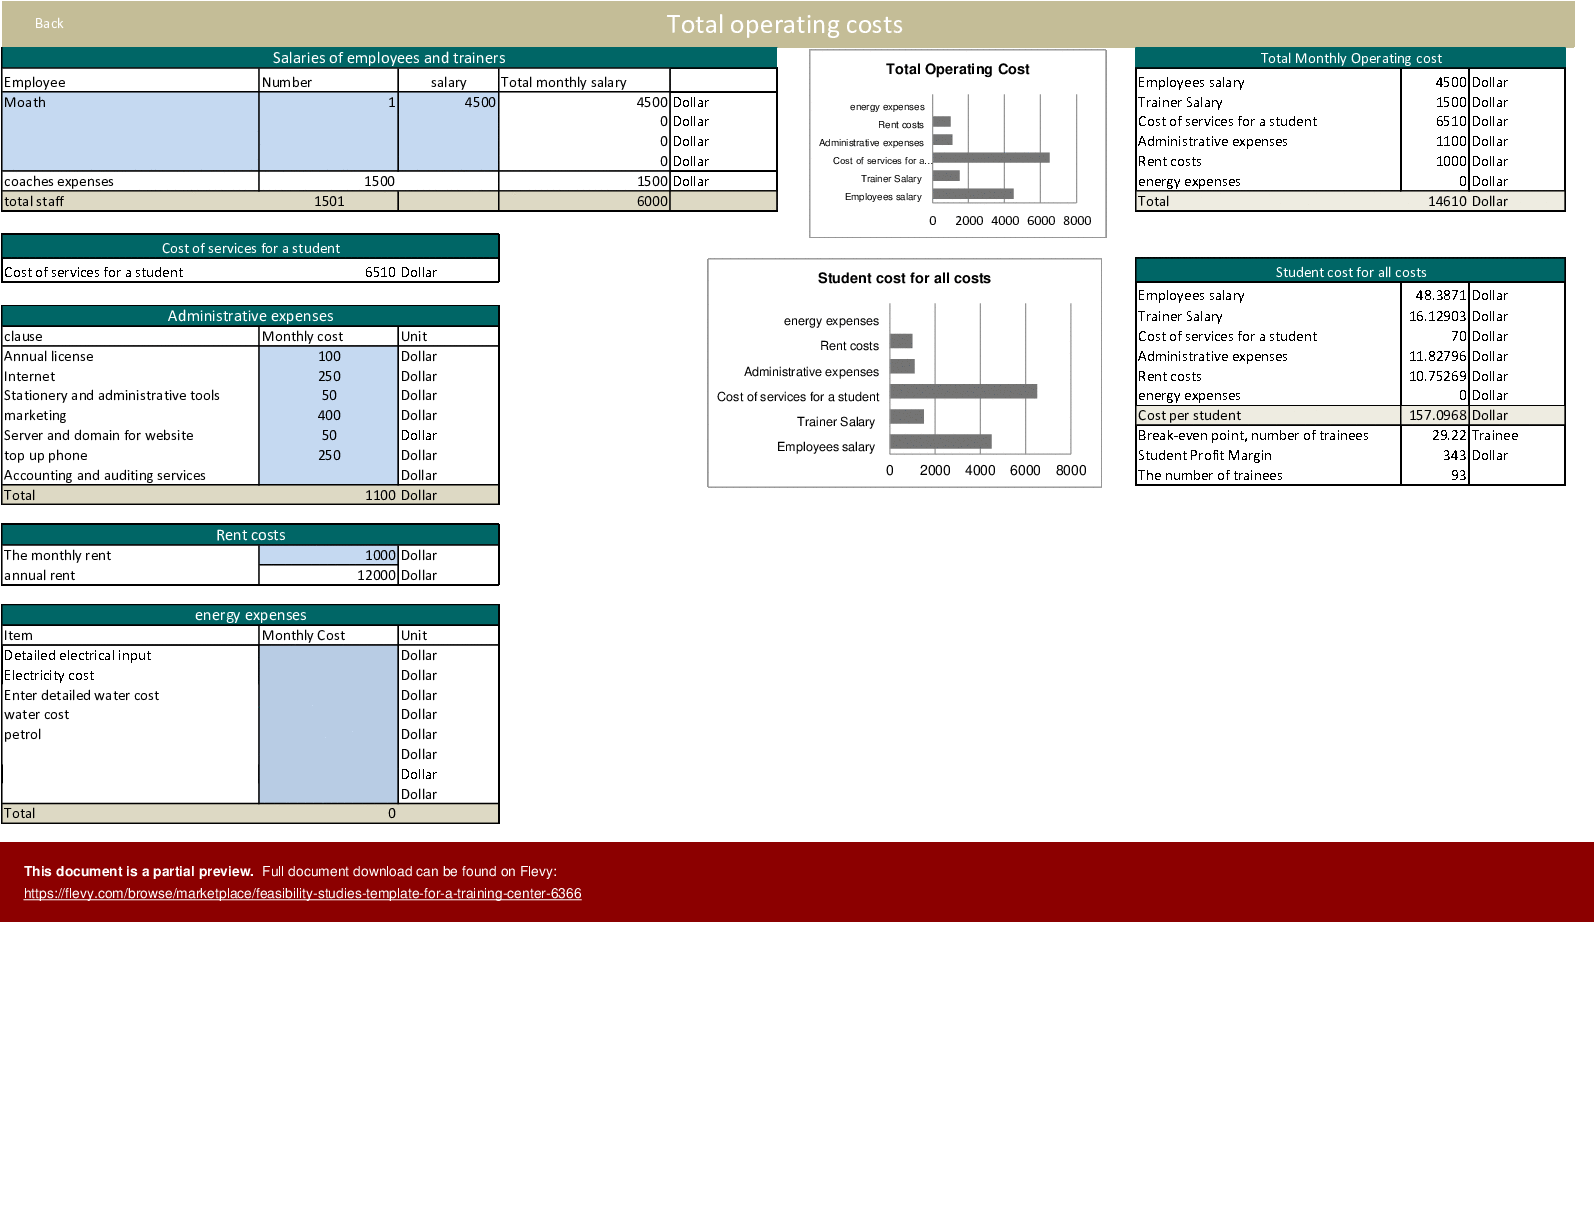 Feasibility Studies Template for a Training Center (Excel template (XLSX)) Preview Image